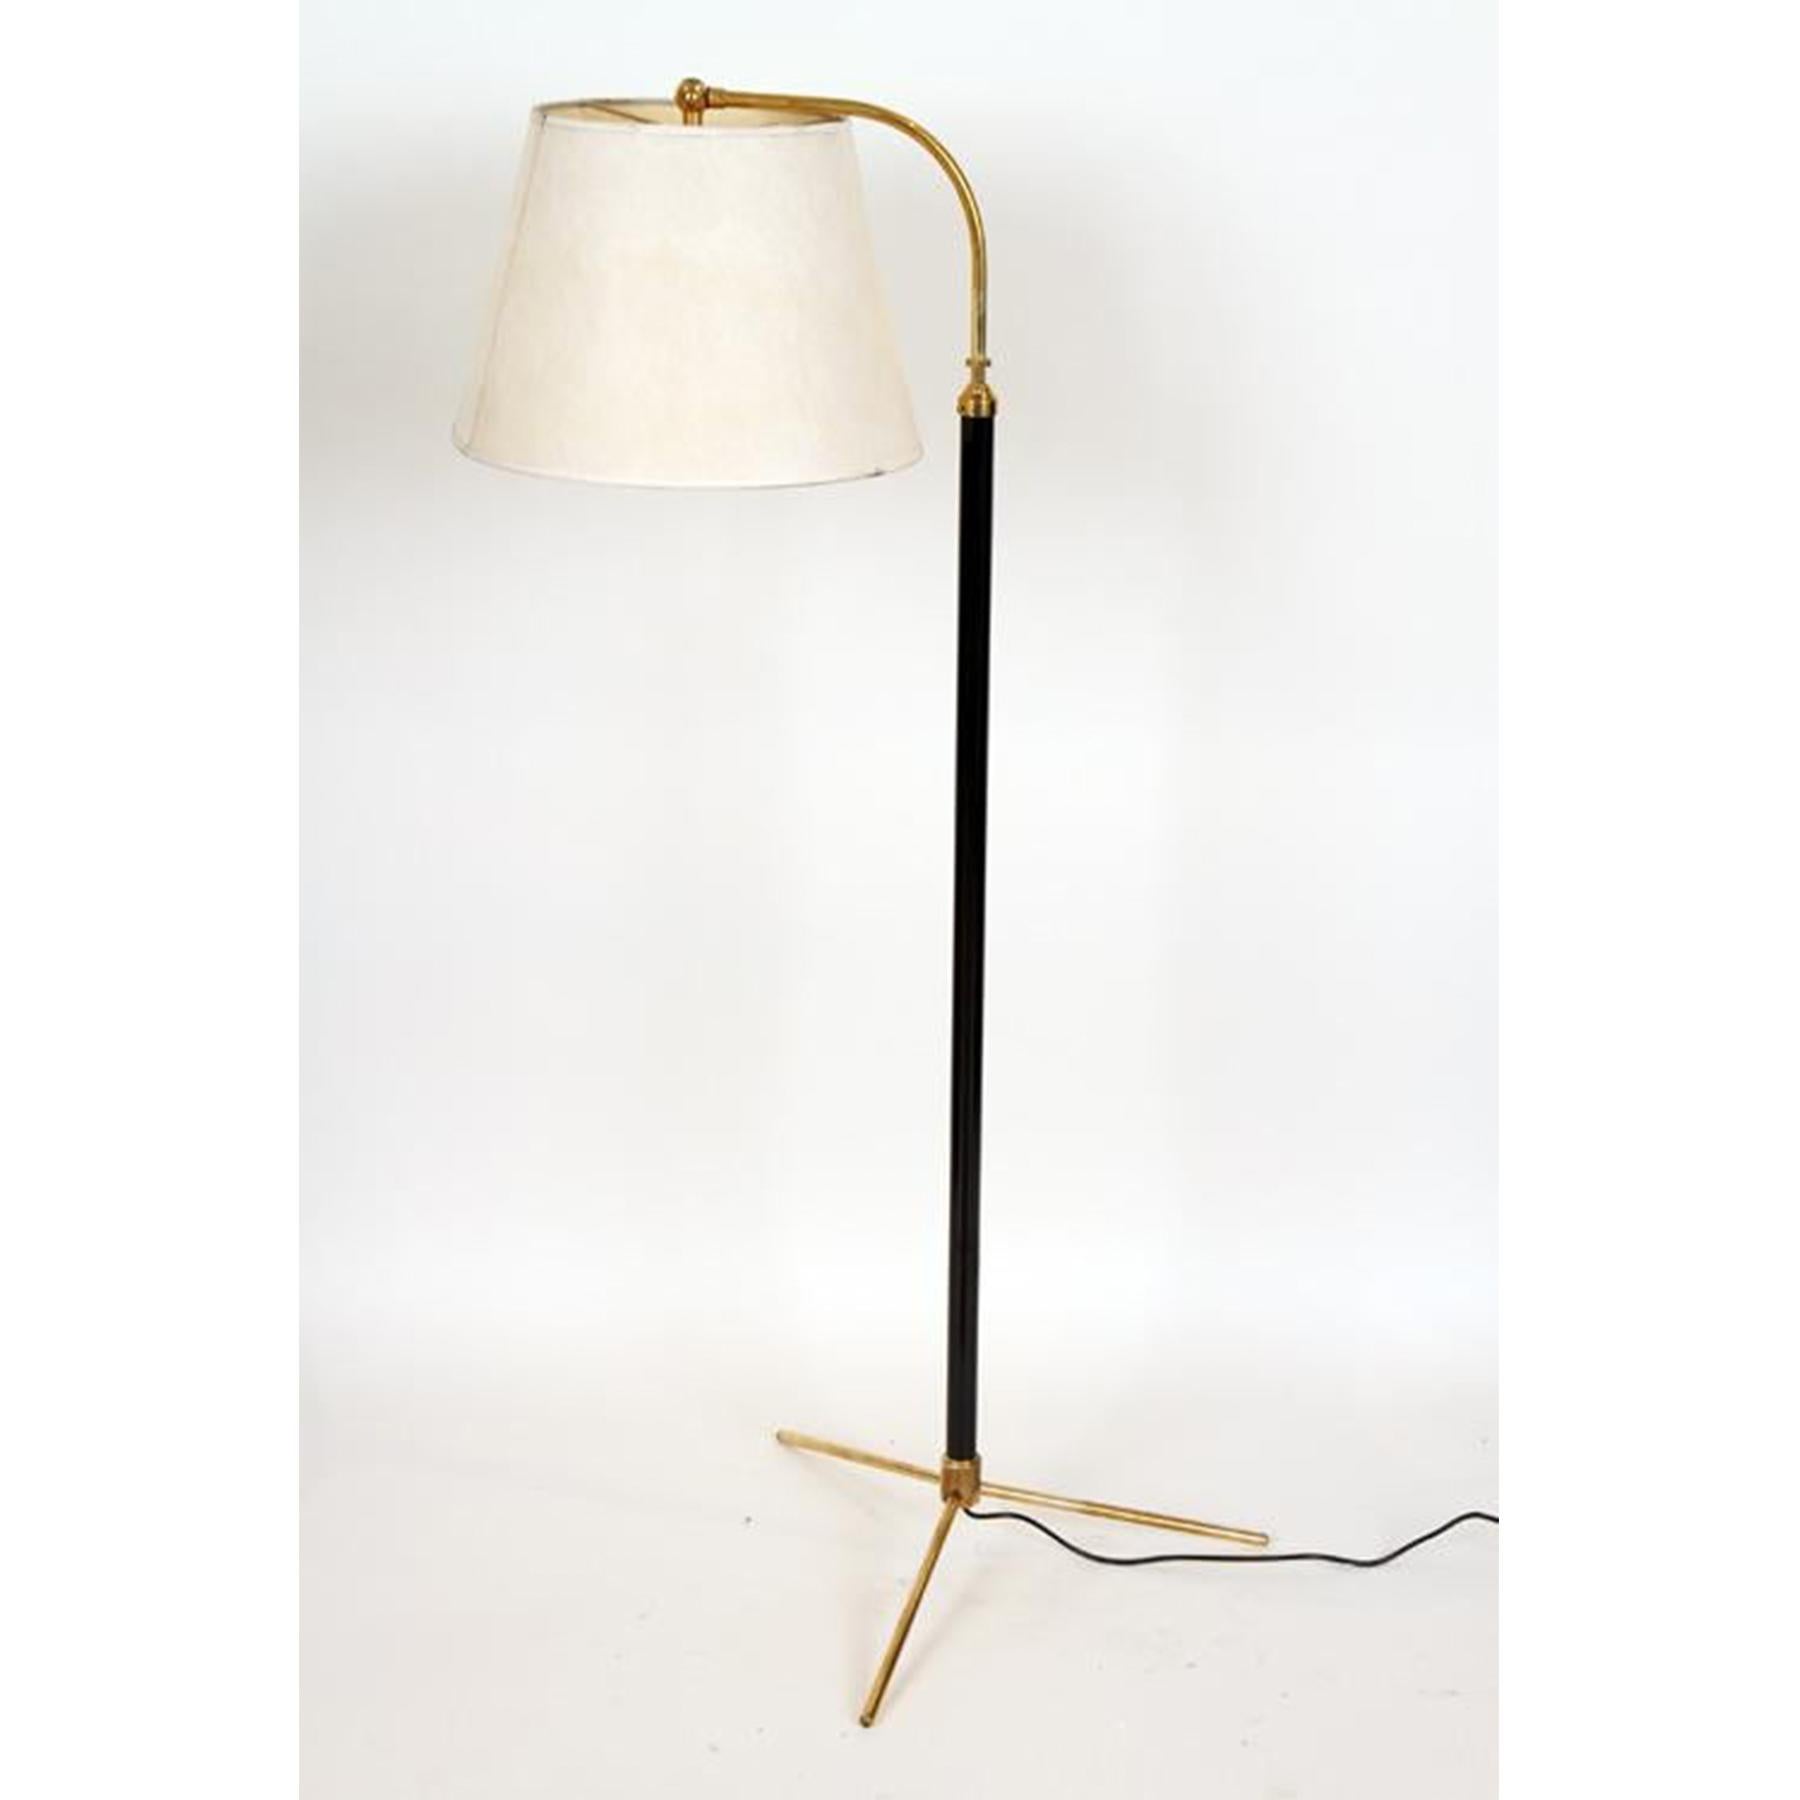 A beautiful pair of Jacques Adnet styled floor lamps with a sleek polished brass tripod base and neck.